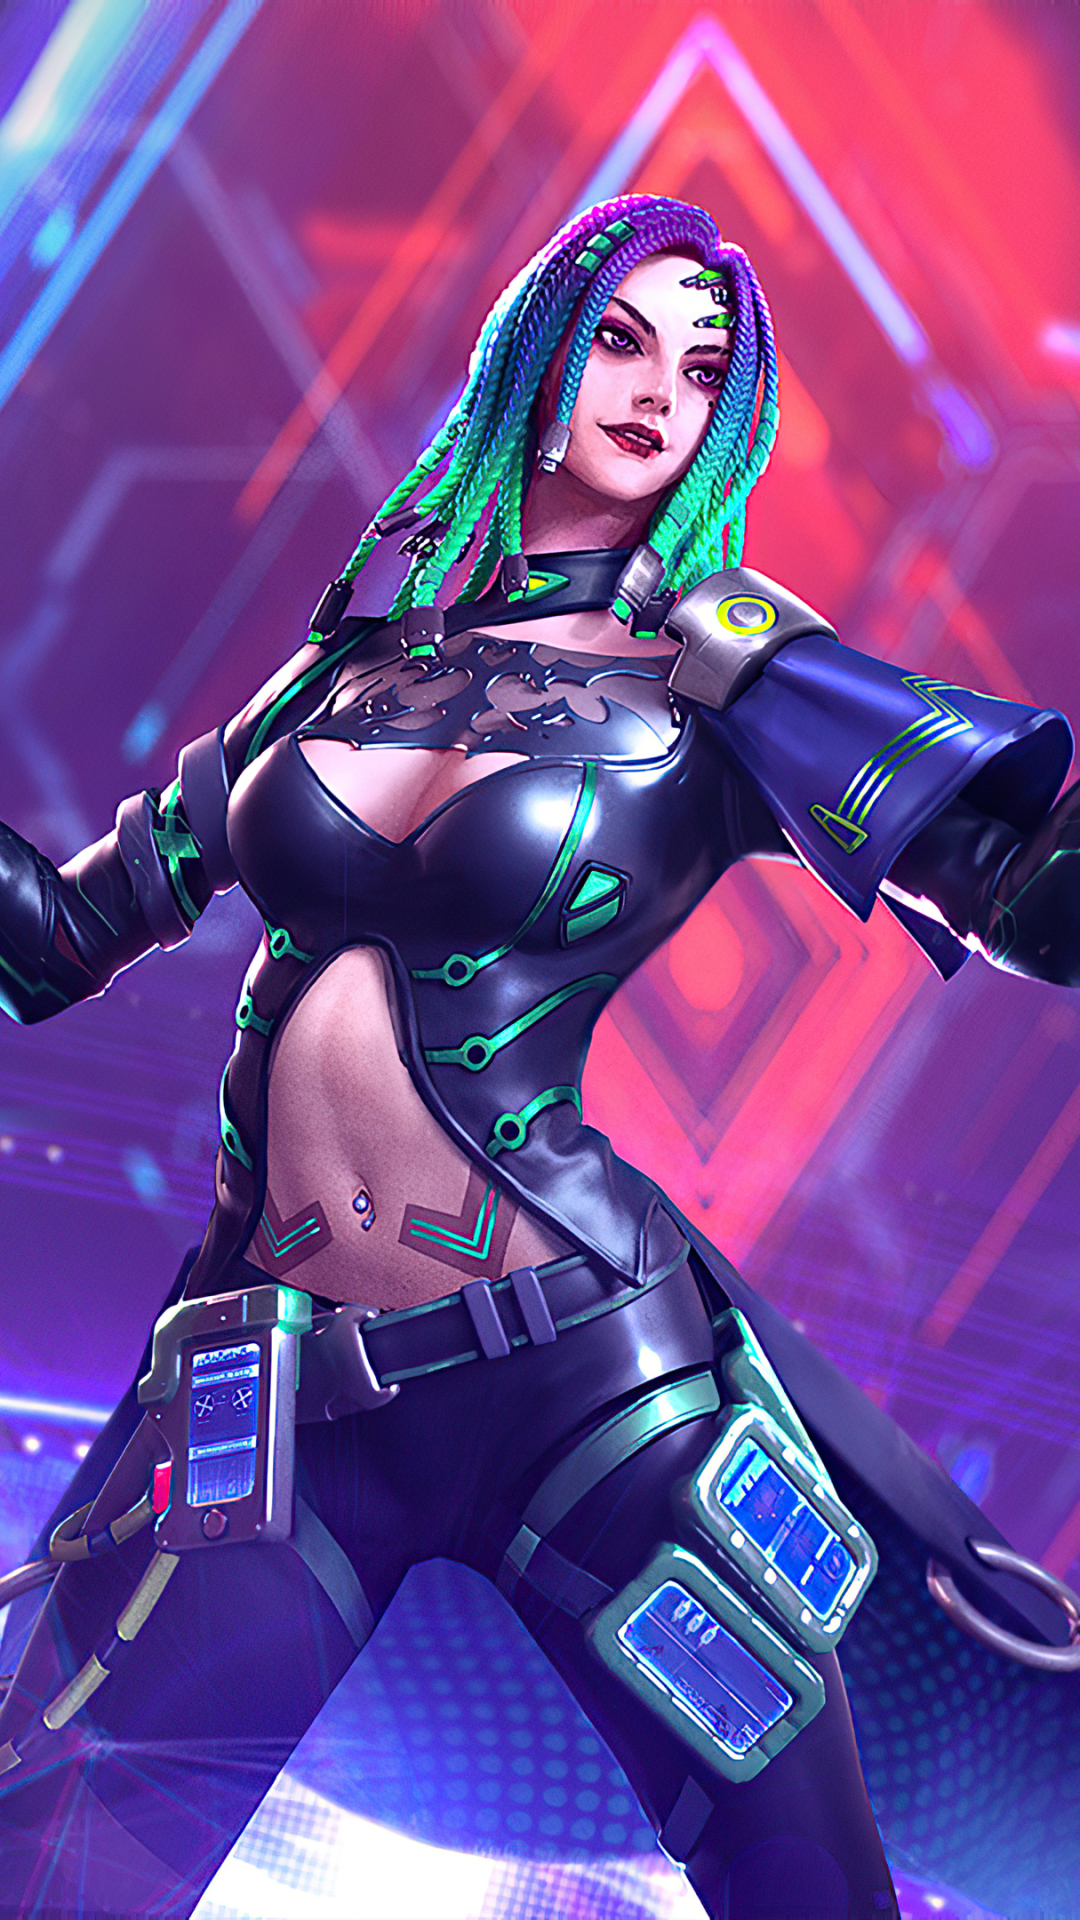 Garena Free Fire Phone Wallpaper - Mobile Abyss